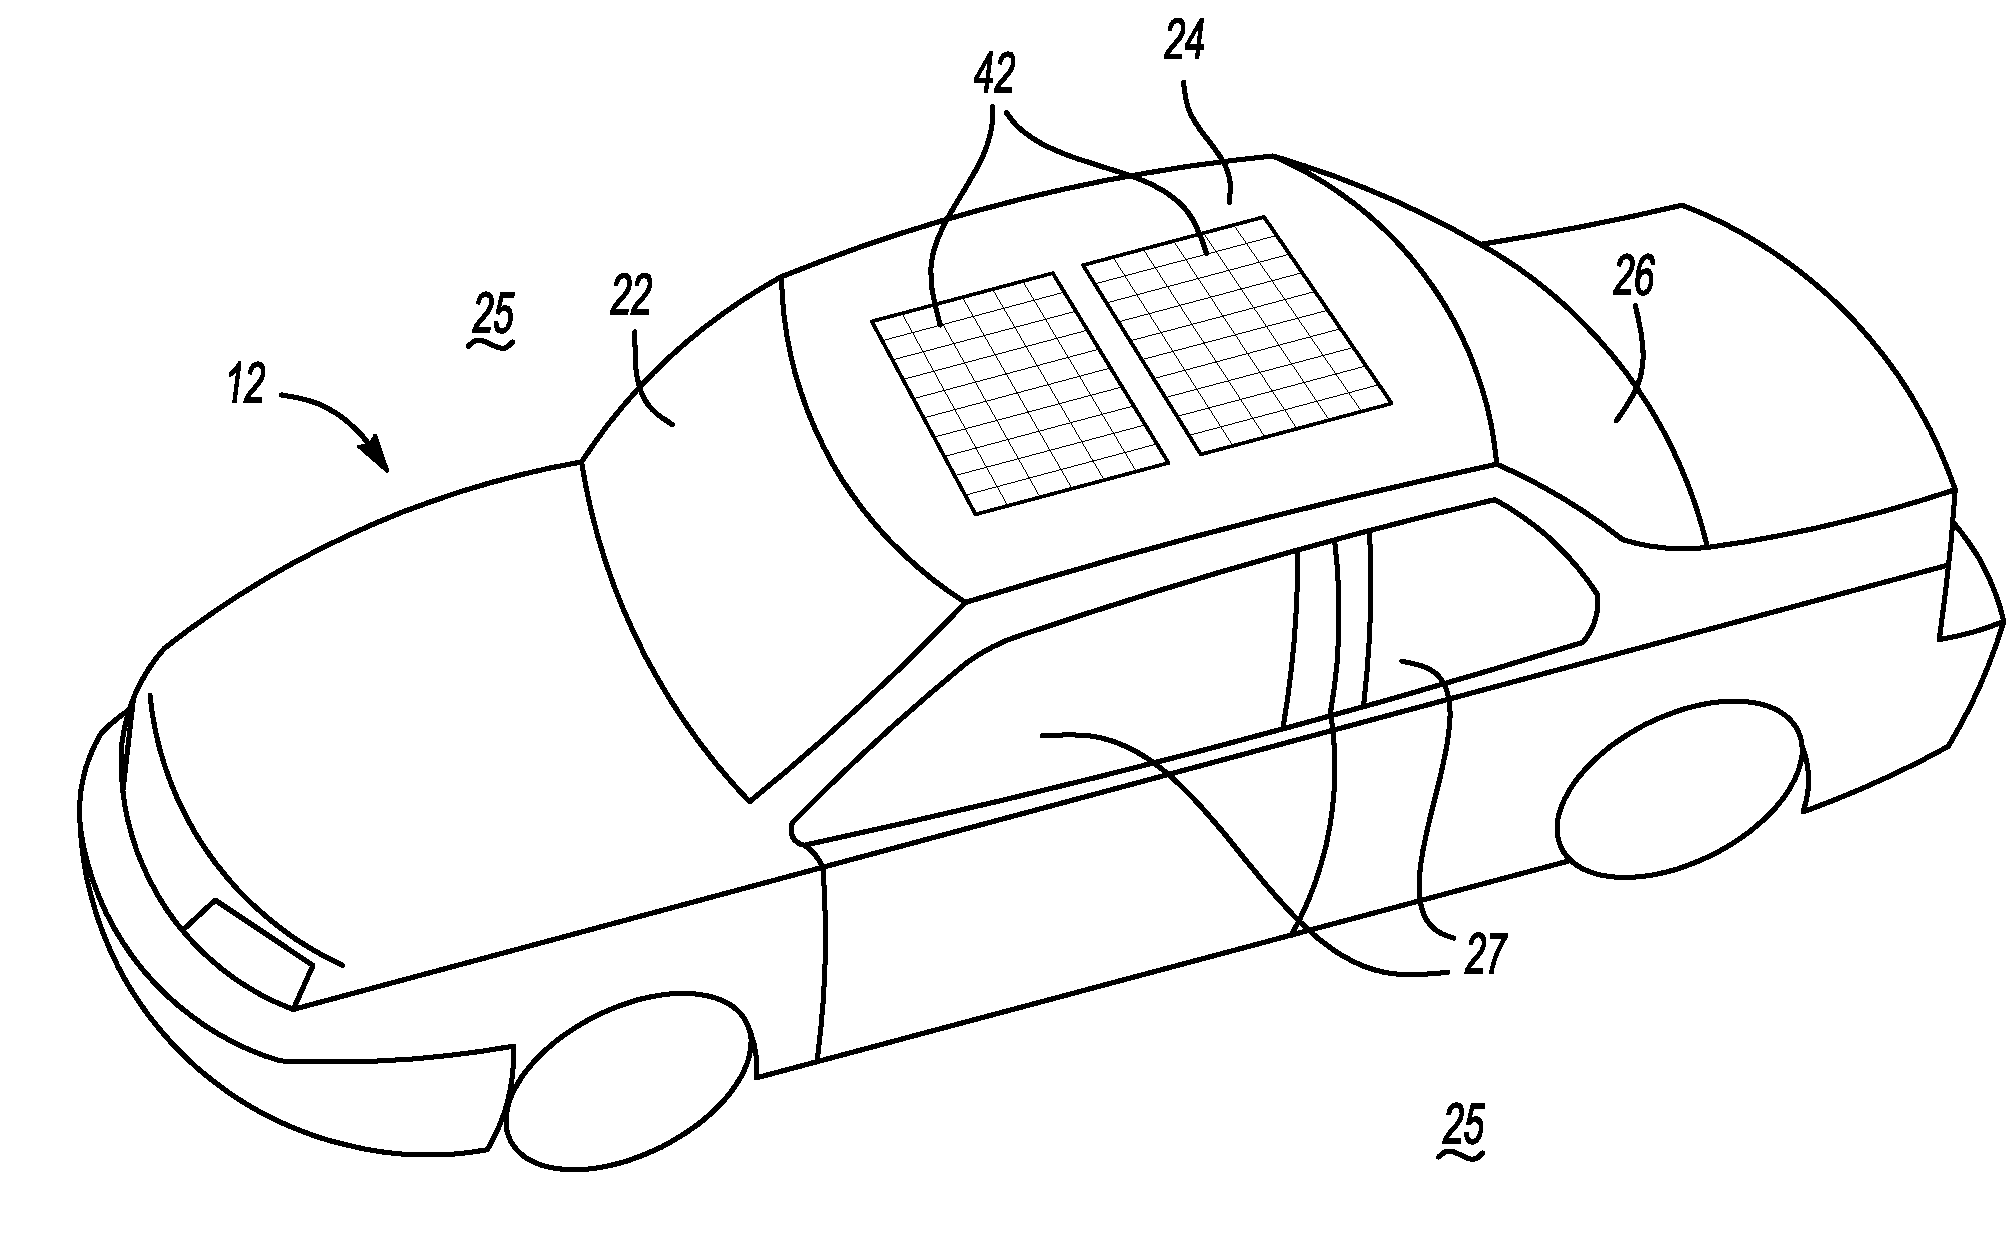 System and Method to Reduce Thermal Energy in Vehicle Interiors Subjected to Solar Radiation